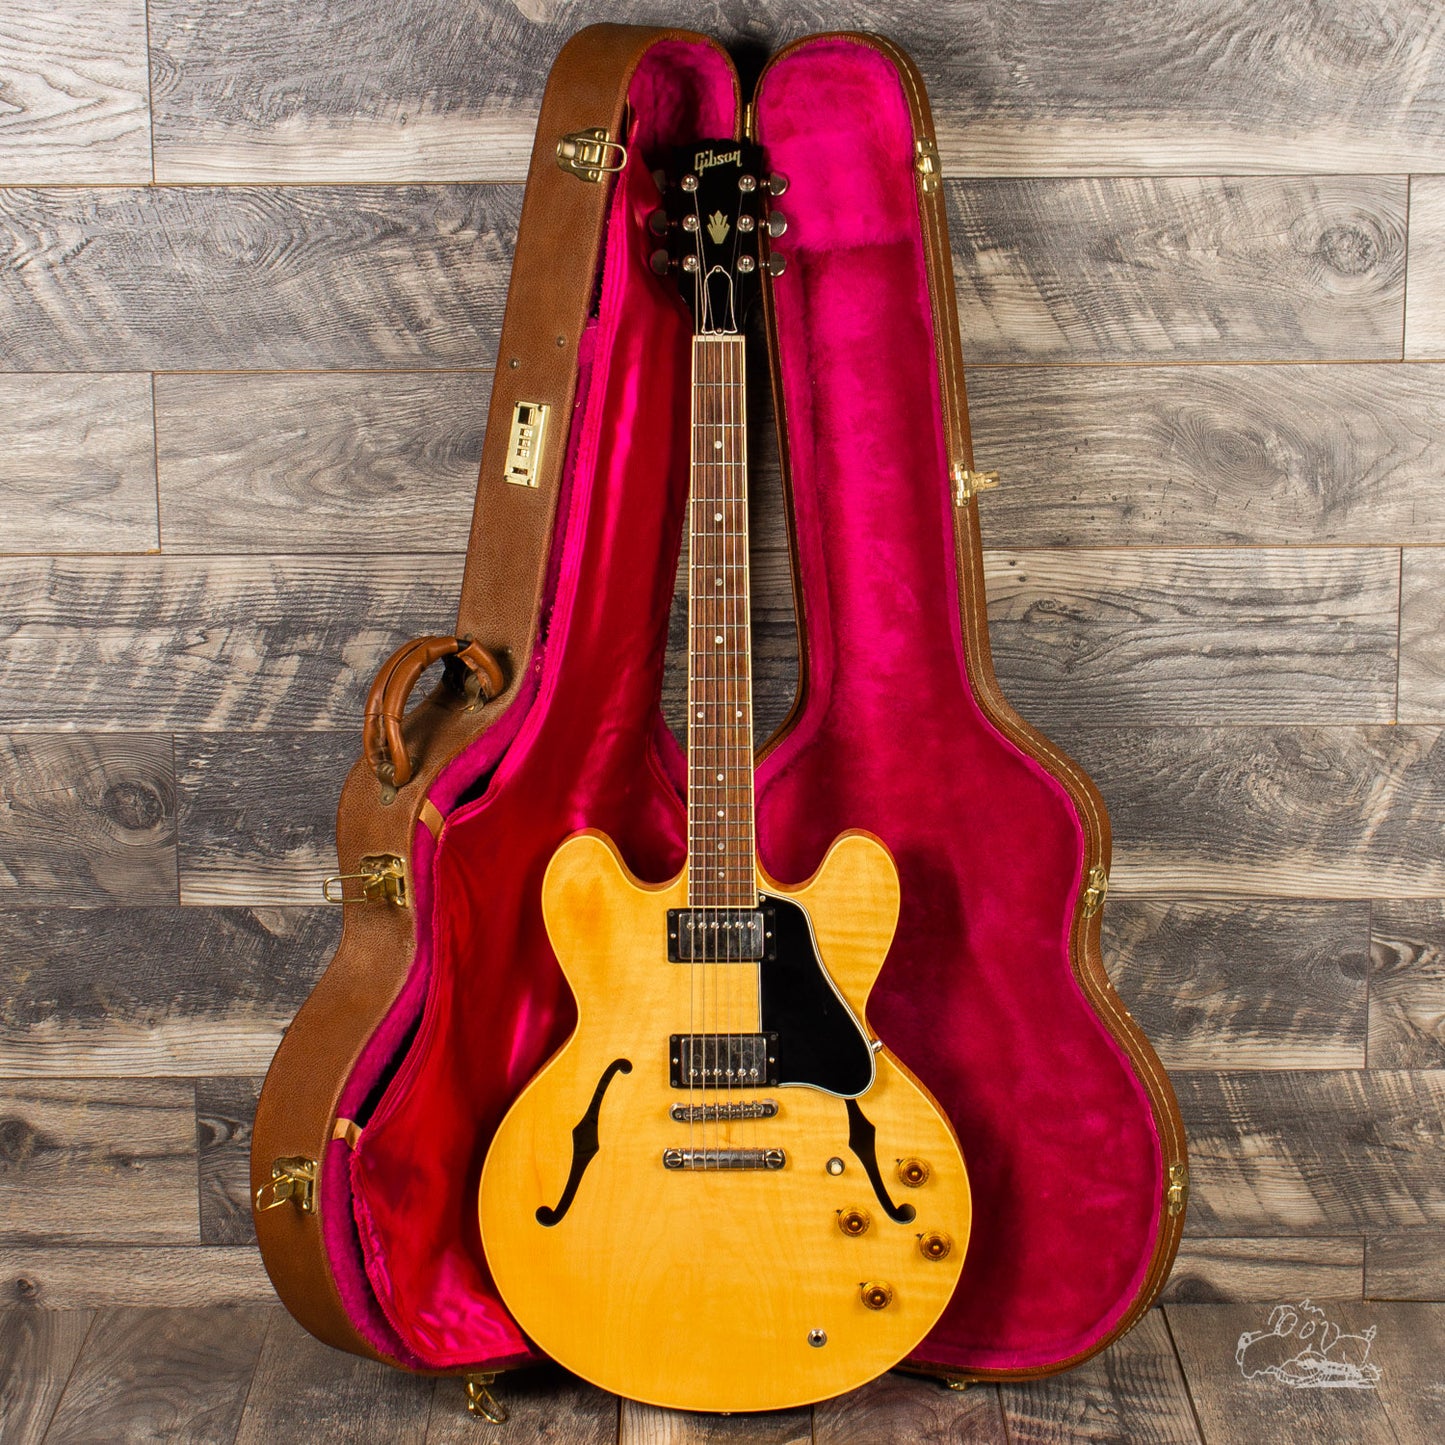 1992 Gibson ES-335 Dot Figured Top in Antique Natural